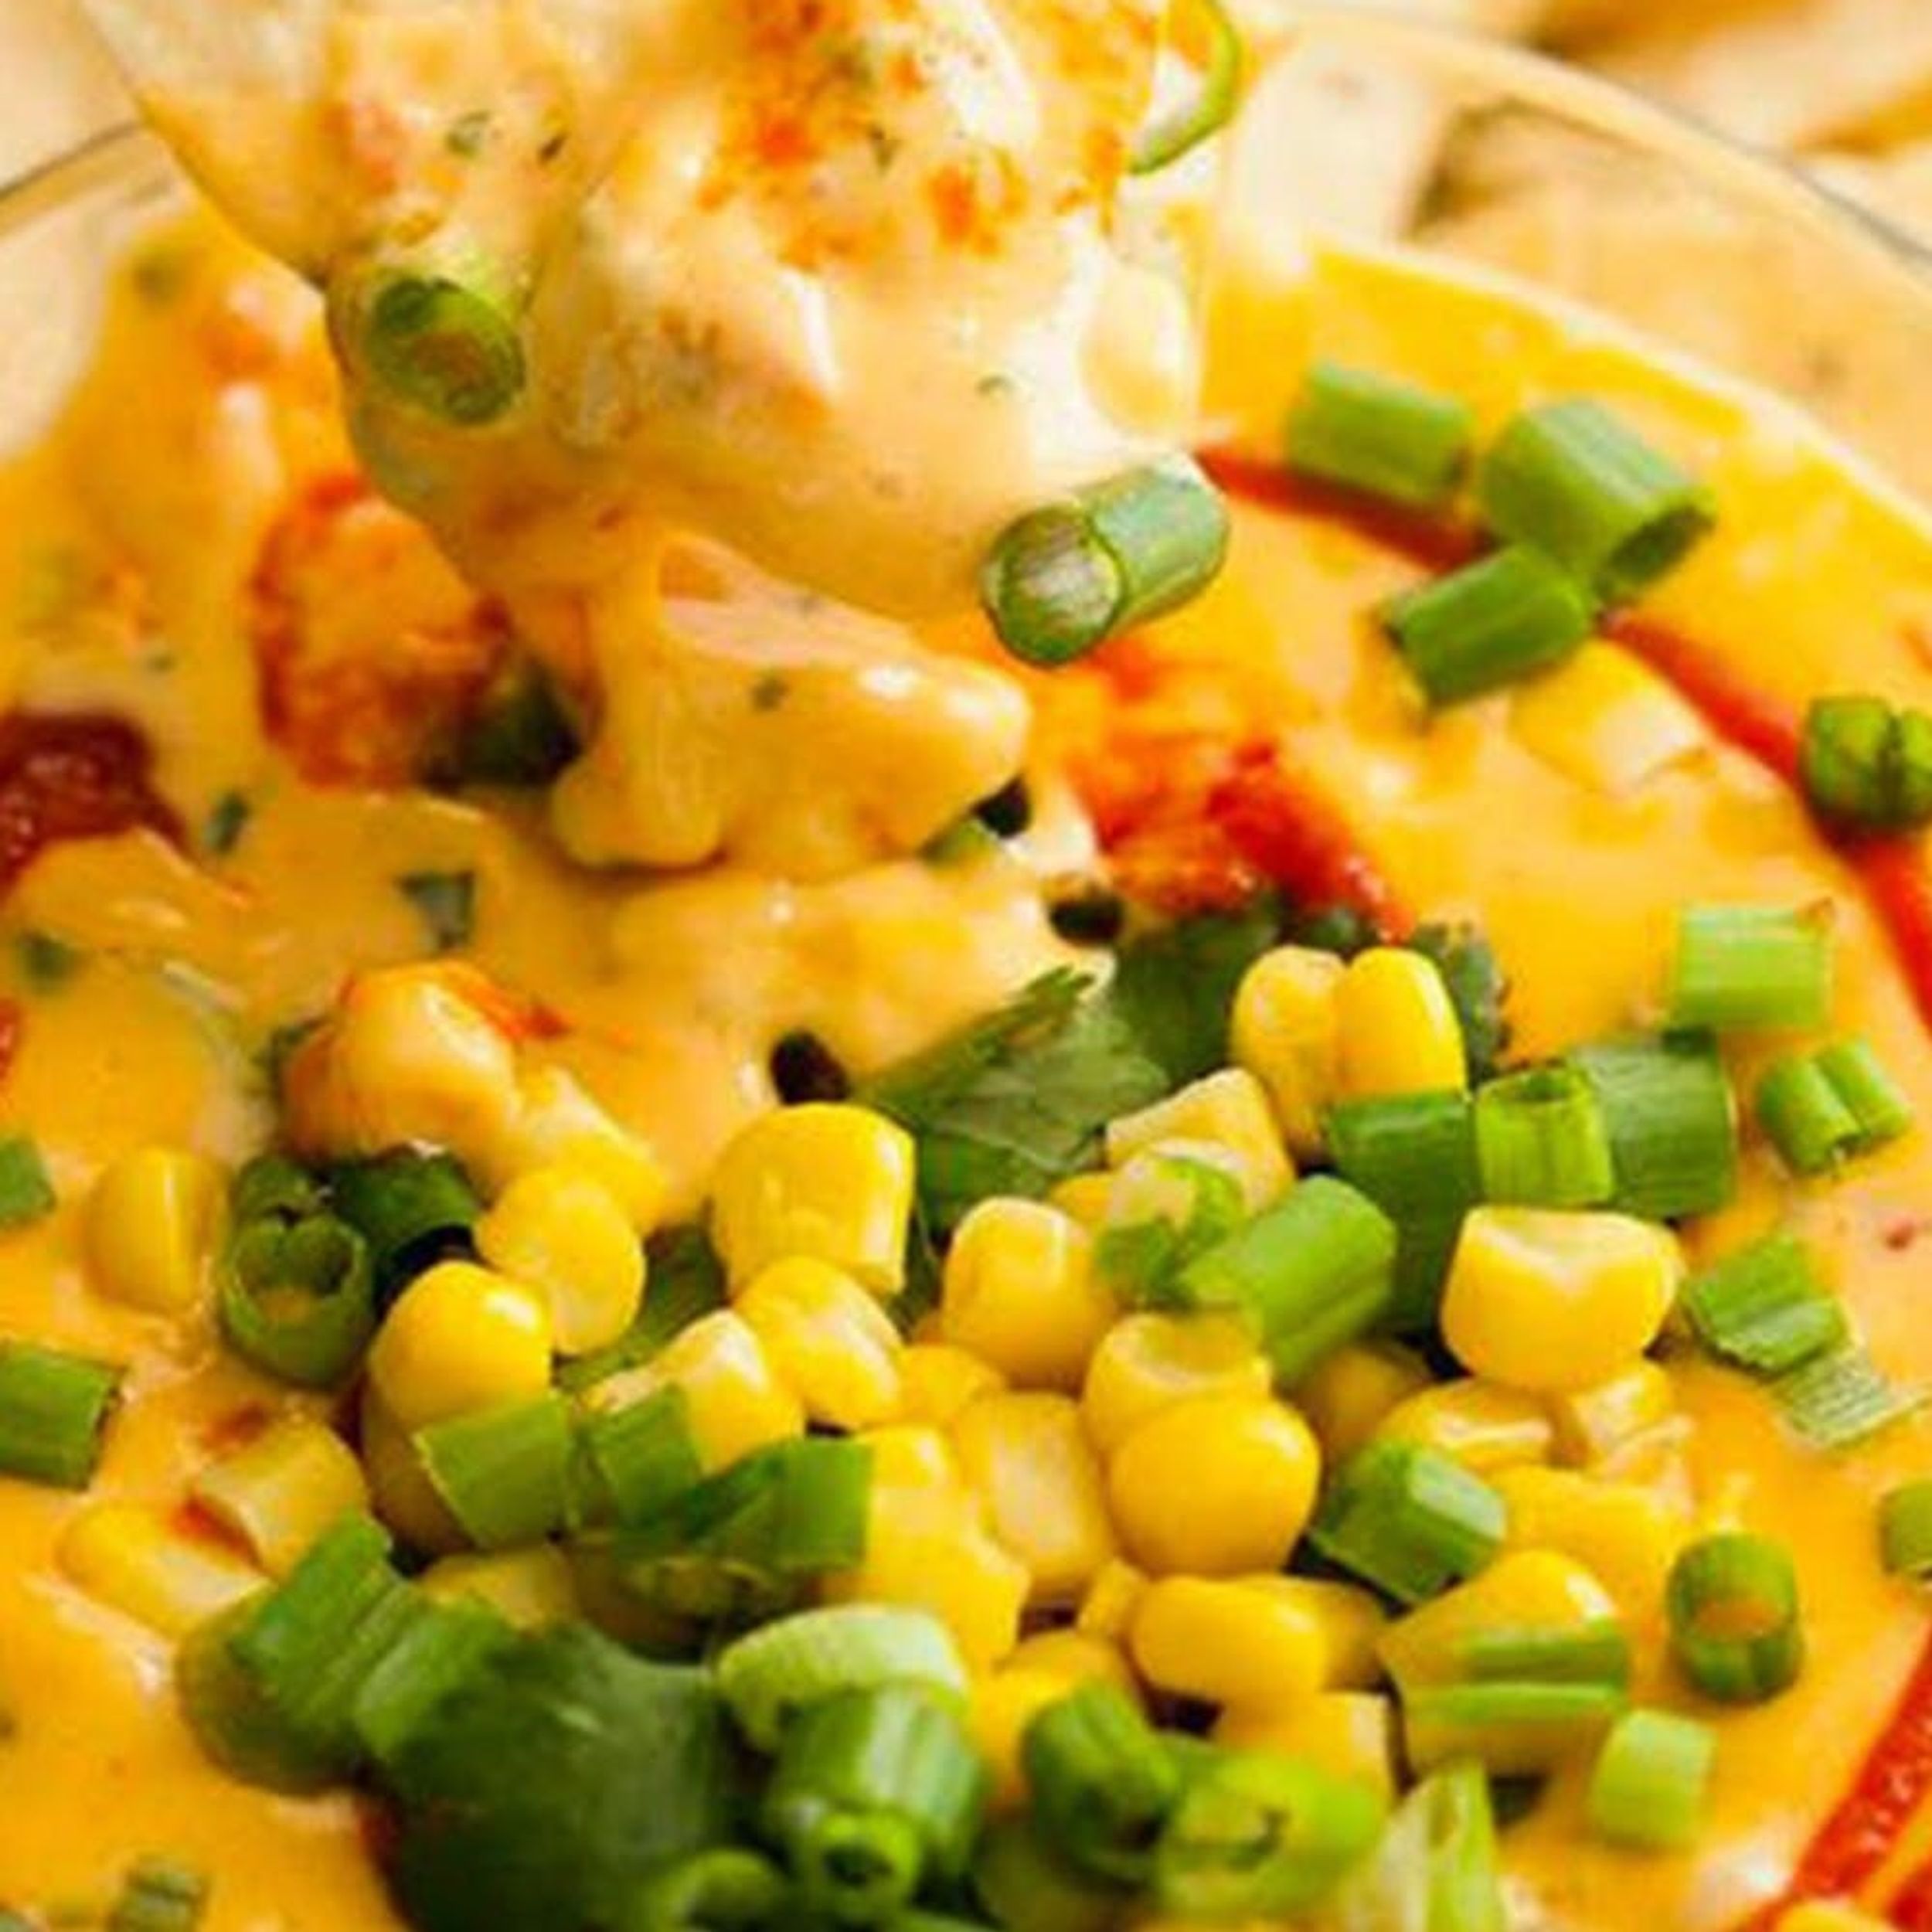 10 Surprising Add-Ins to Make Queso Dip Even Better